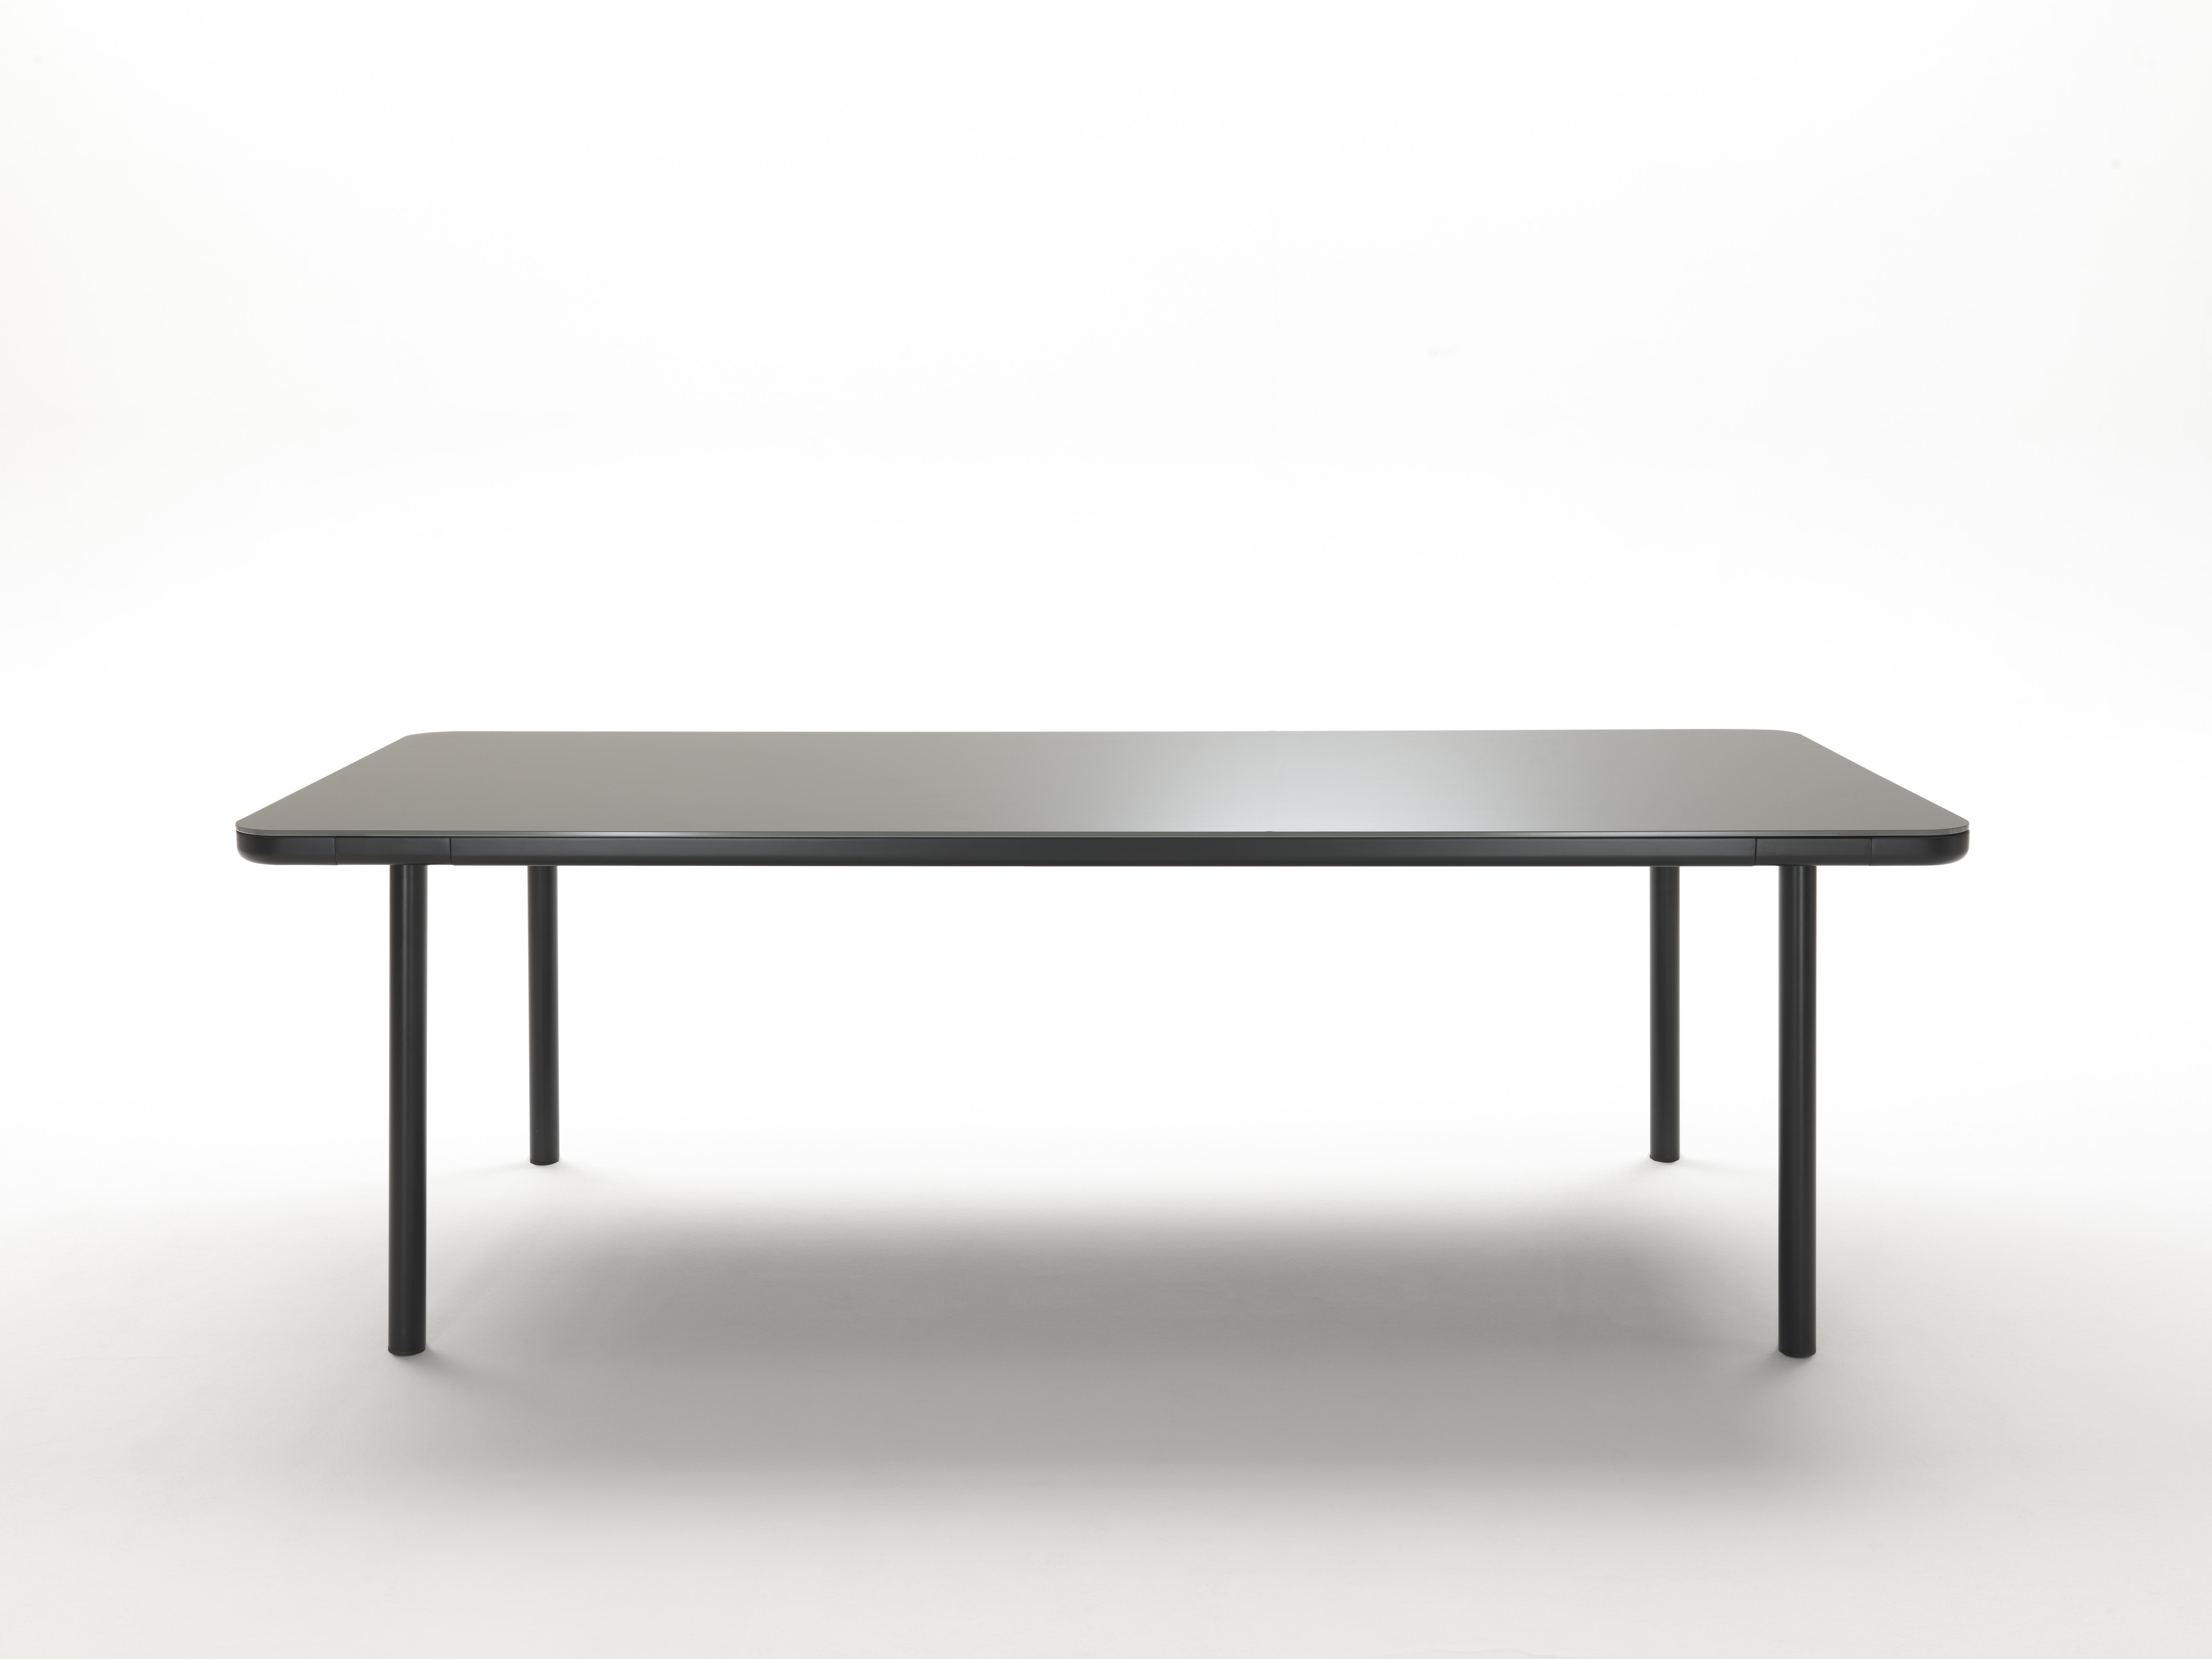 Lacquered Point Neuf table by Rodolfo Dordoni
Materials: black chromed or black lacquered metal base with gray or matt black lacquered glass top resting on a black lacquered solid wood structure.
Technique: lacquered metal, Chromed. 
Dimensions: